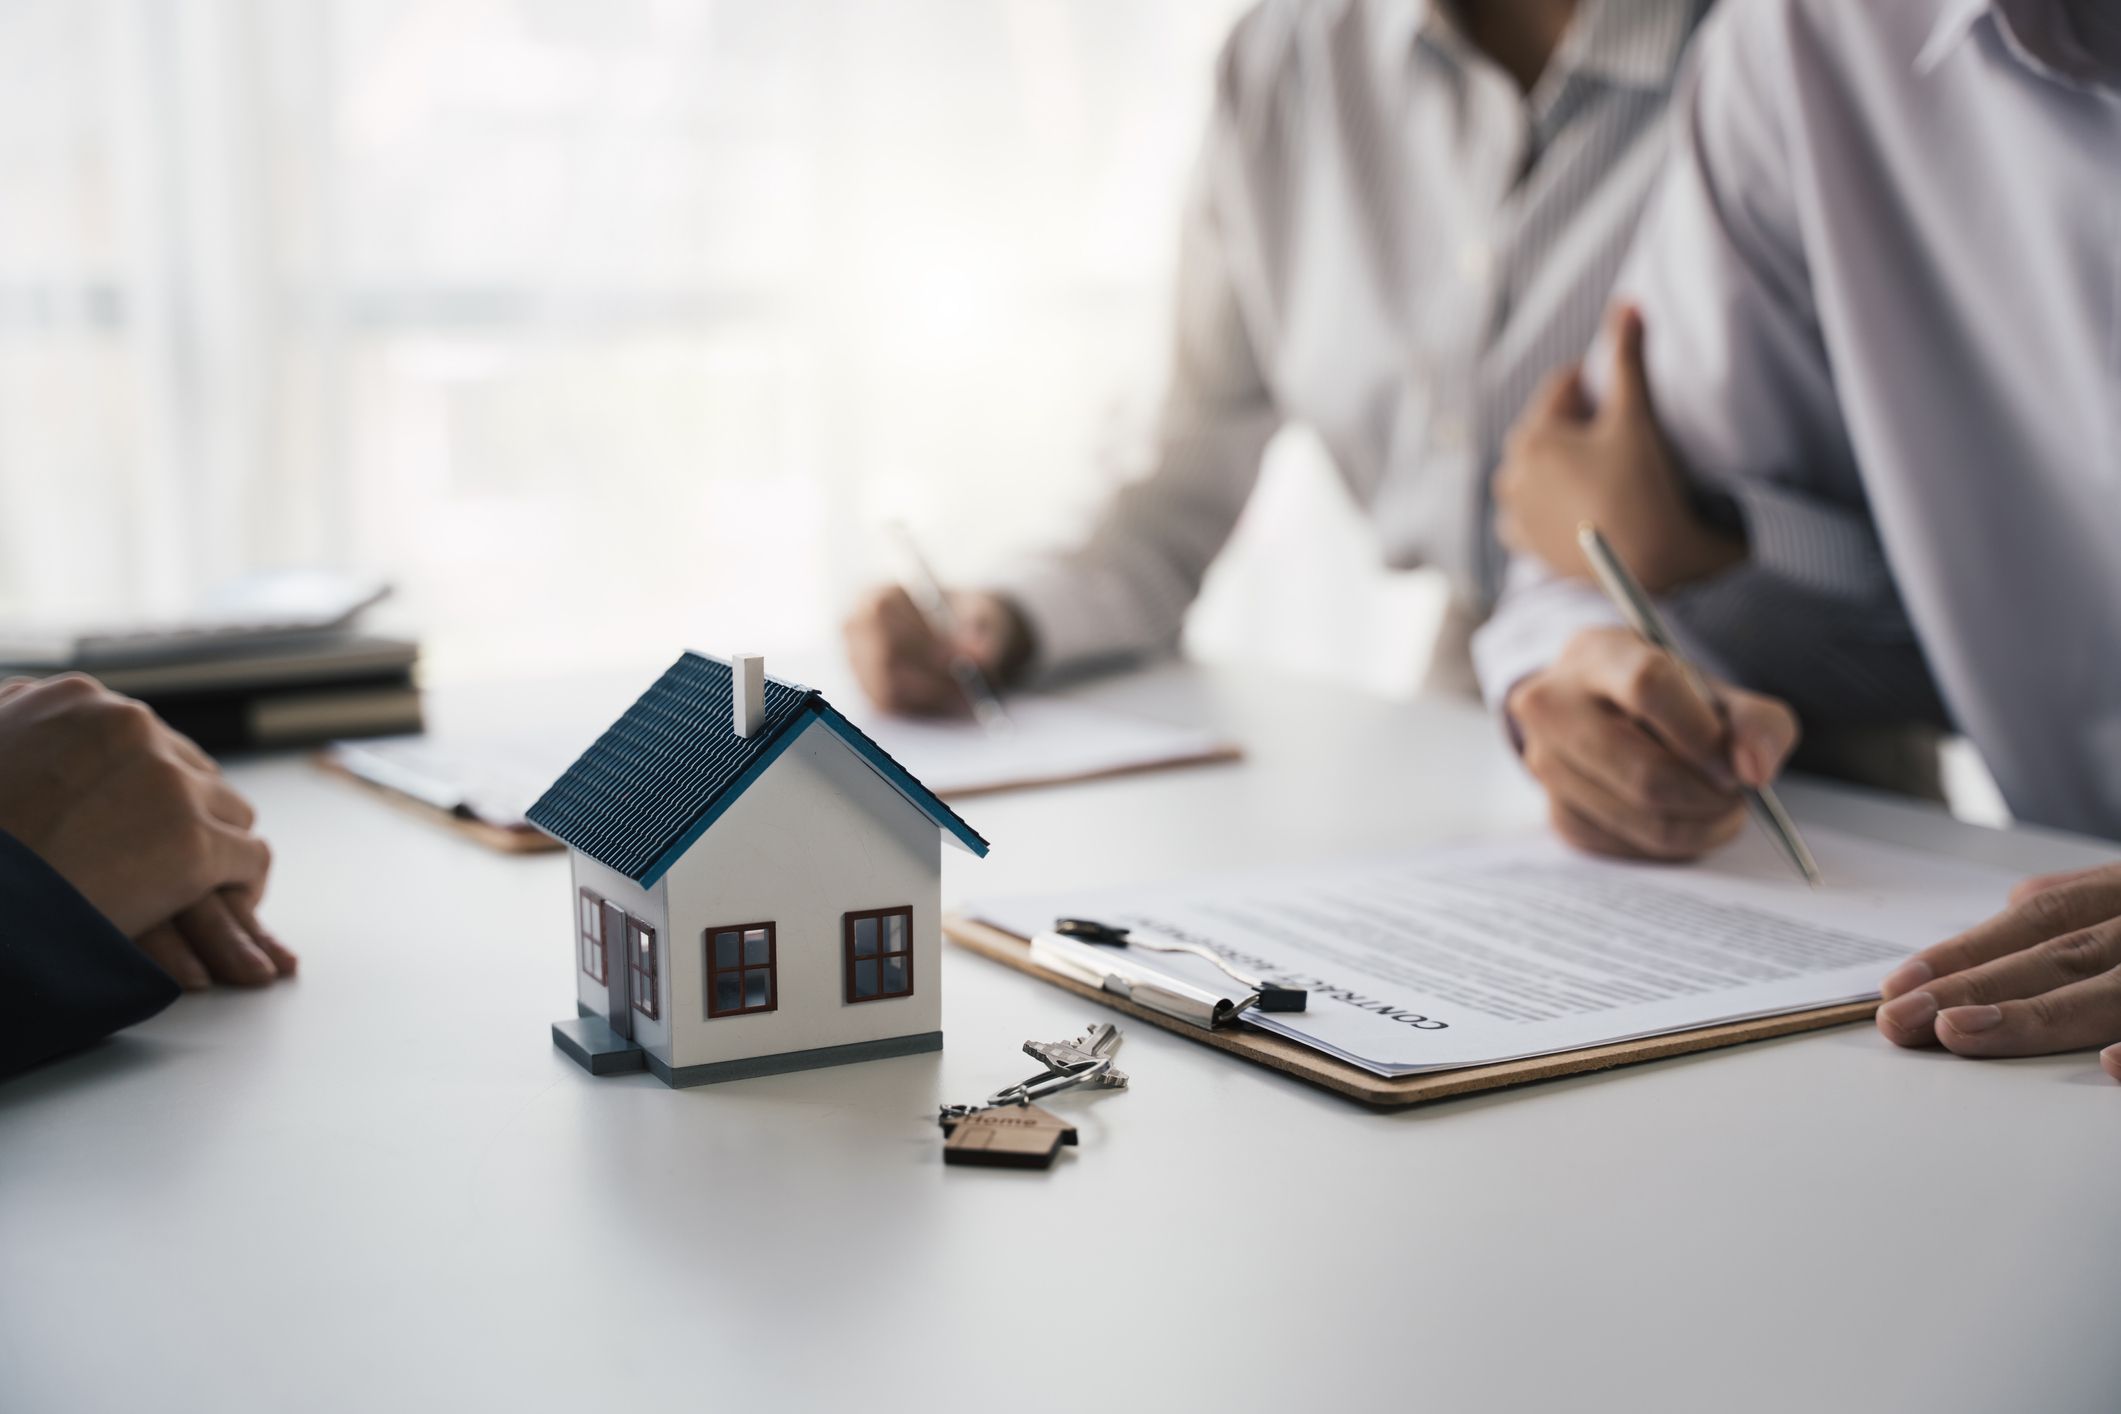 <h1><a href="https://www.msn.com/en-us/news/other/how-are-mortgage-taxes-calculated/ar-BB1hqqC1?disableErrorRedirect=true&infiniteContentCount=0">How Are Mortgage Taxes Calculated?</a></h1>